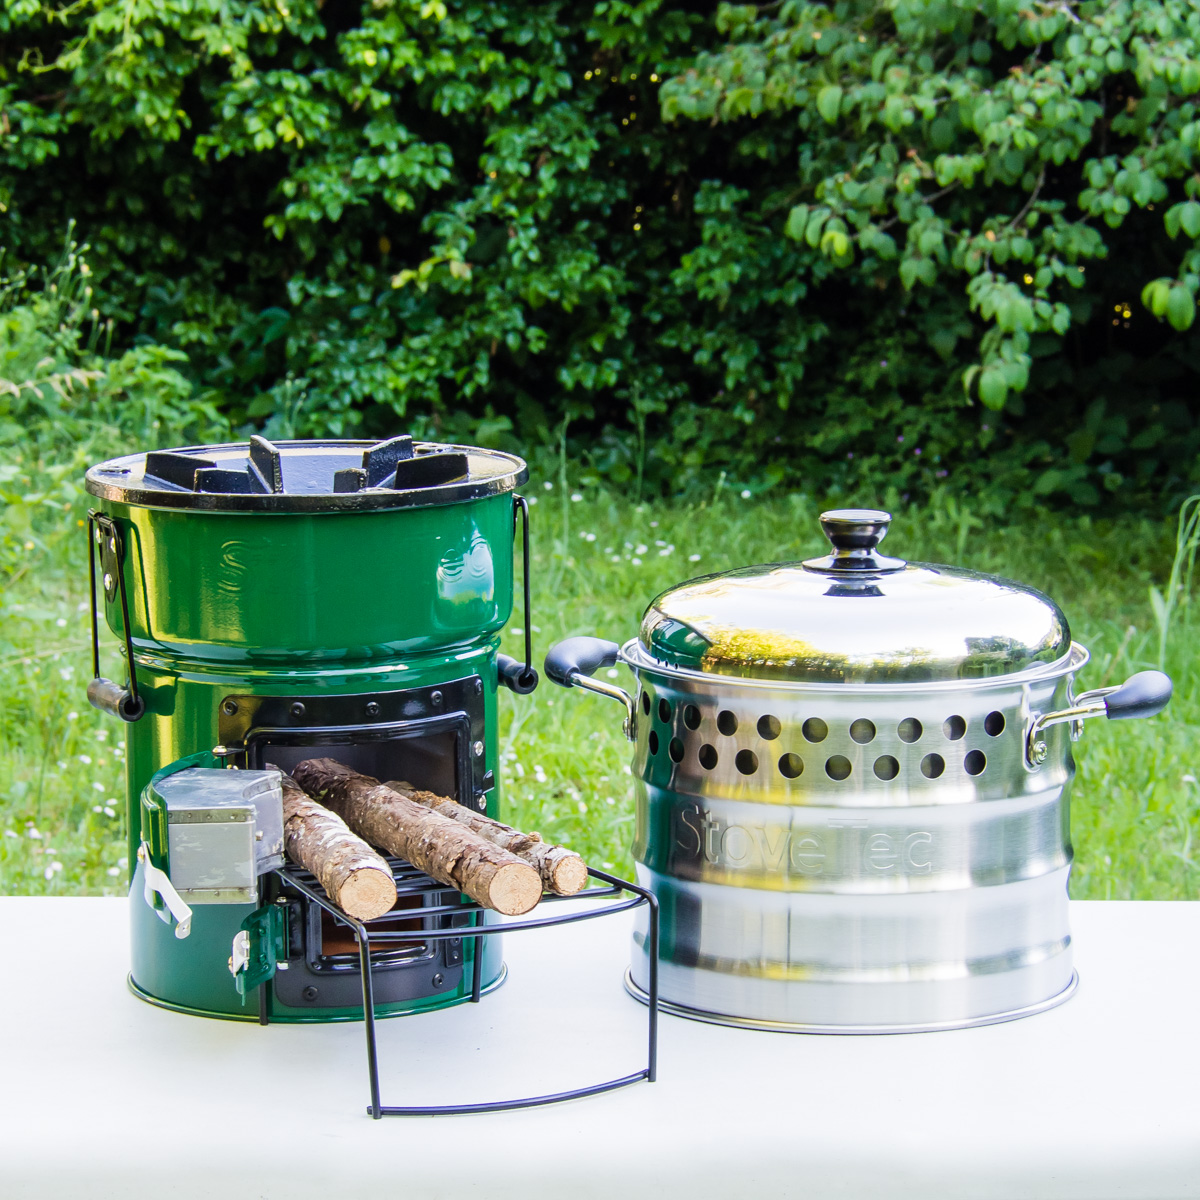 Big Foot Deluxe cookstove and Super Pot combo deal